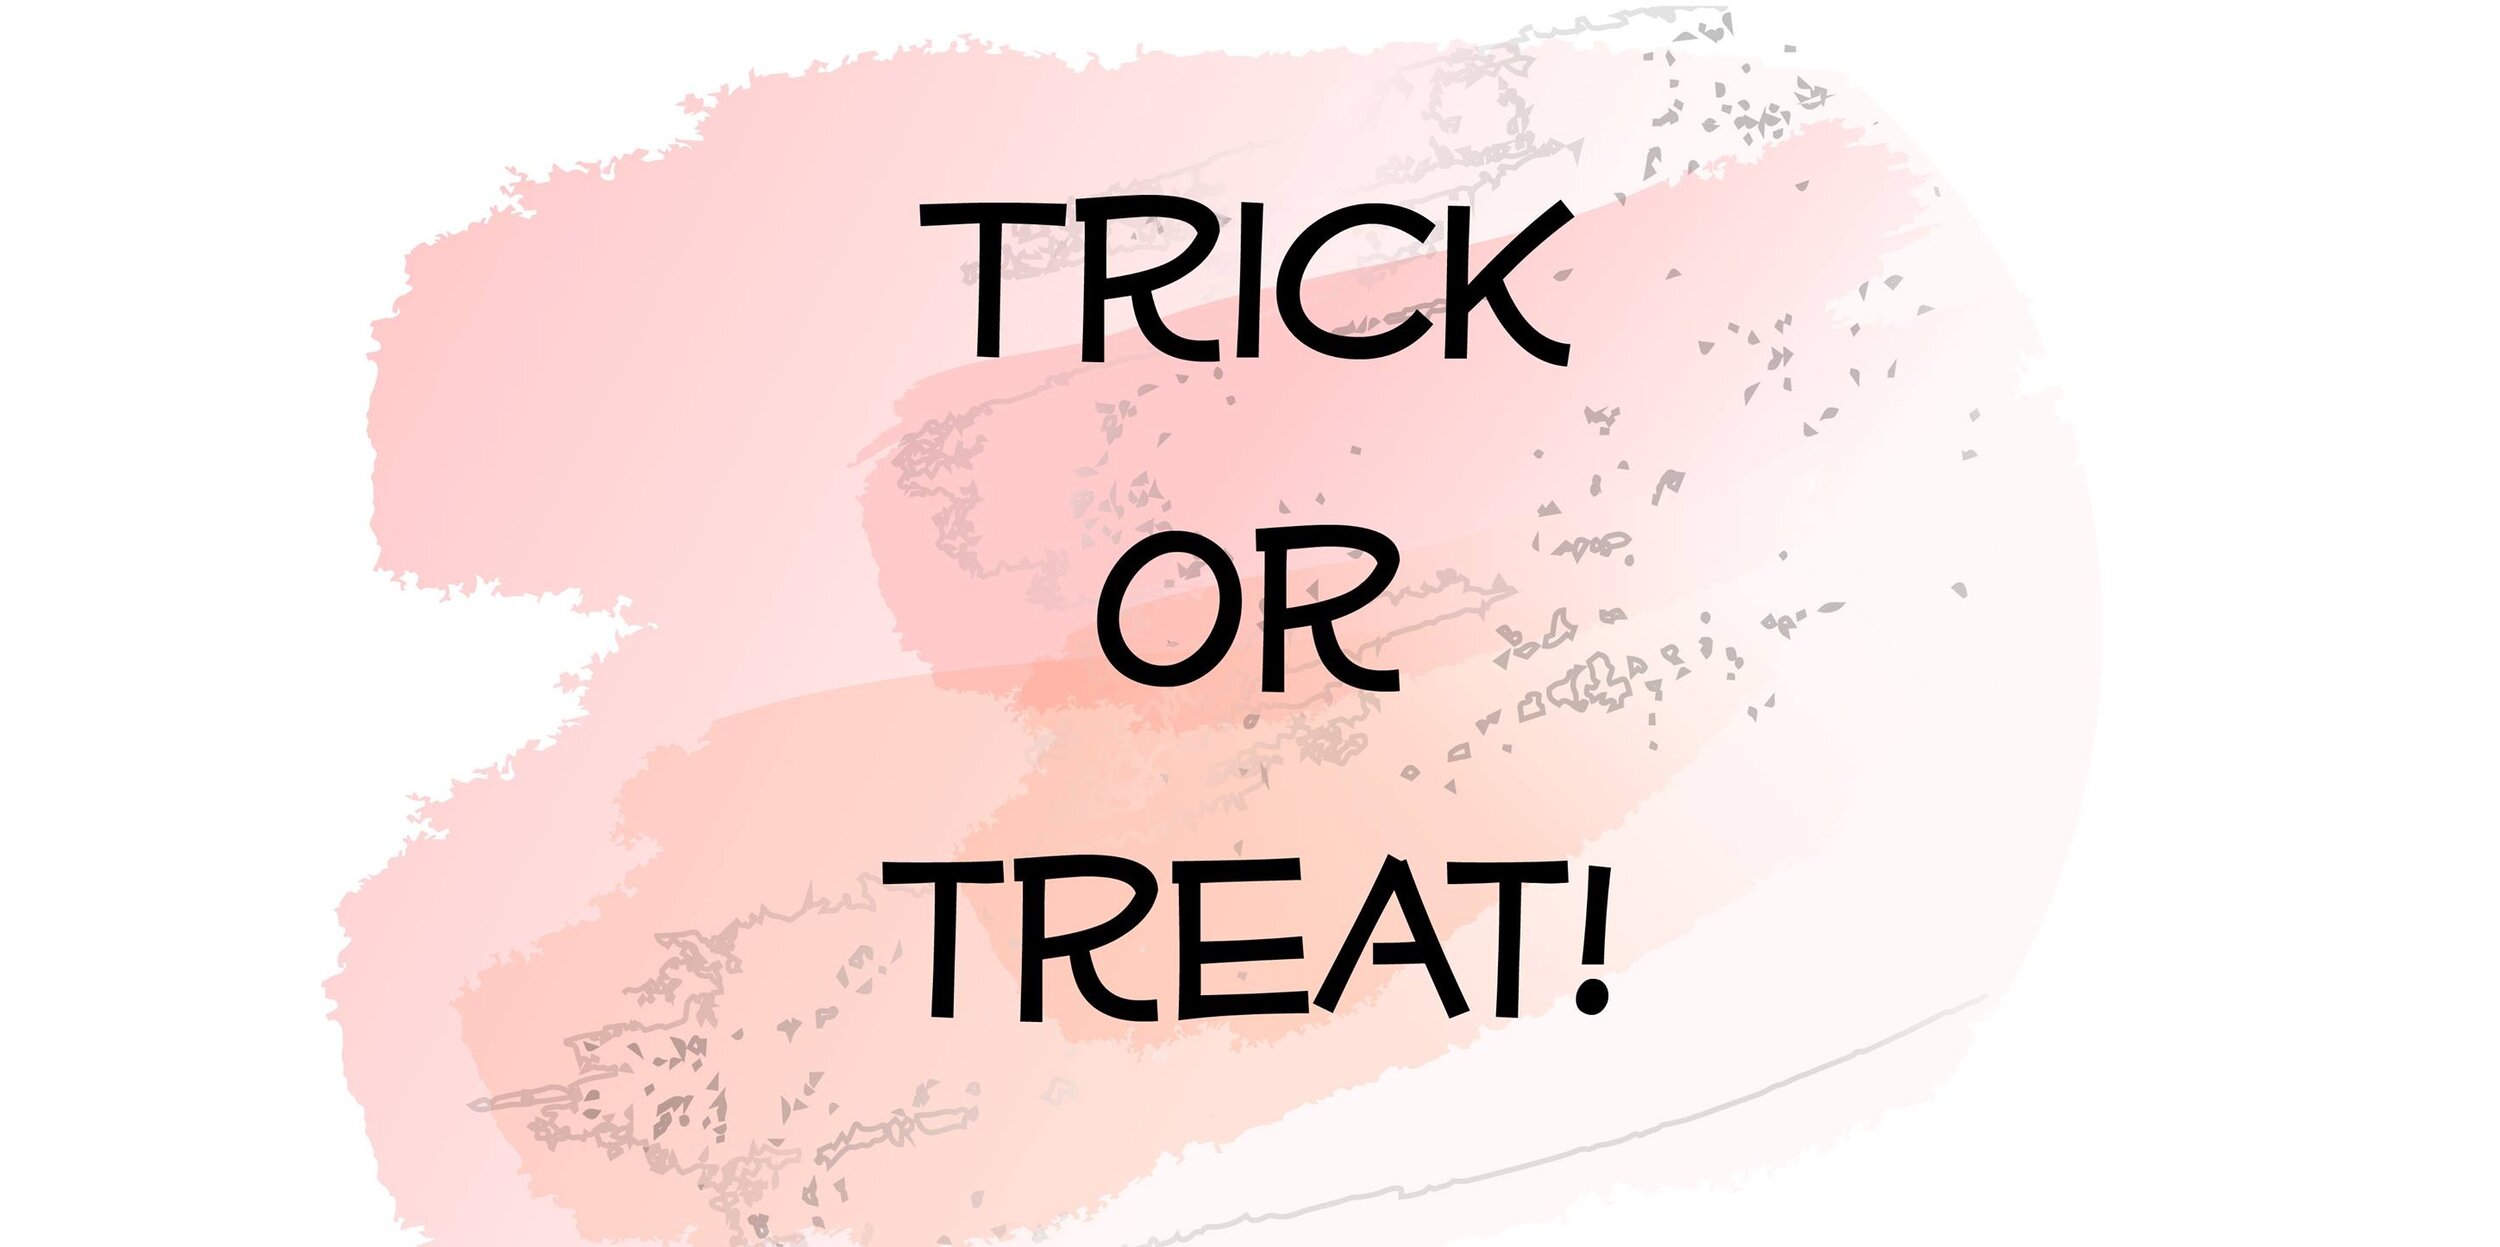 Trick or Treat at Bare Necessities - Bare Necessities Hand Made Apparel & Bare Necessities Fabrics invite your little ones to trick or treat in costume in-store from 12:30pm to 5pm on October 31st.Be sure to RSVP so they can make sure to have enough treats for all!#208, 118 1st Avenue West, Cochrane